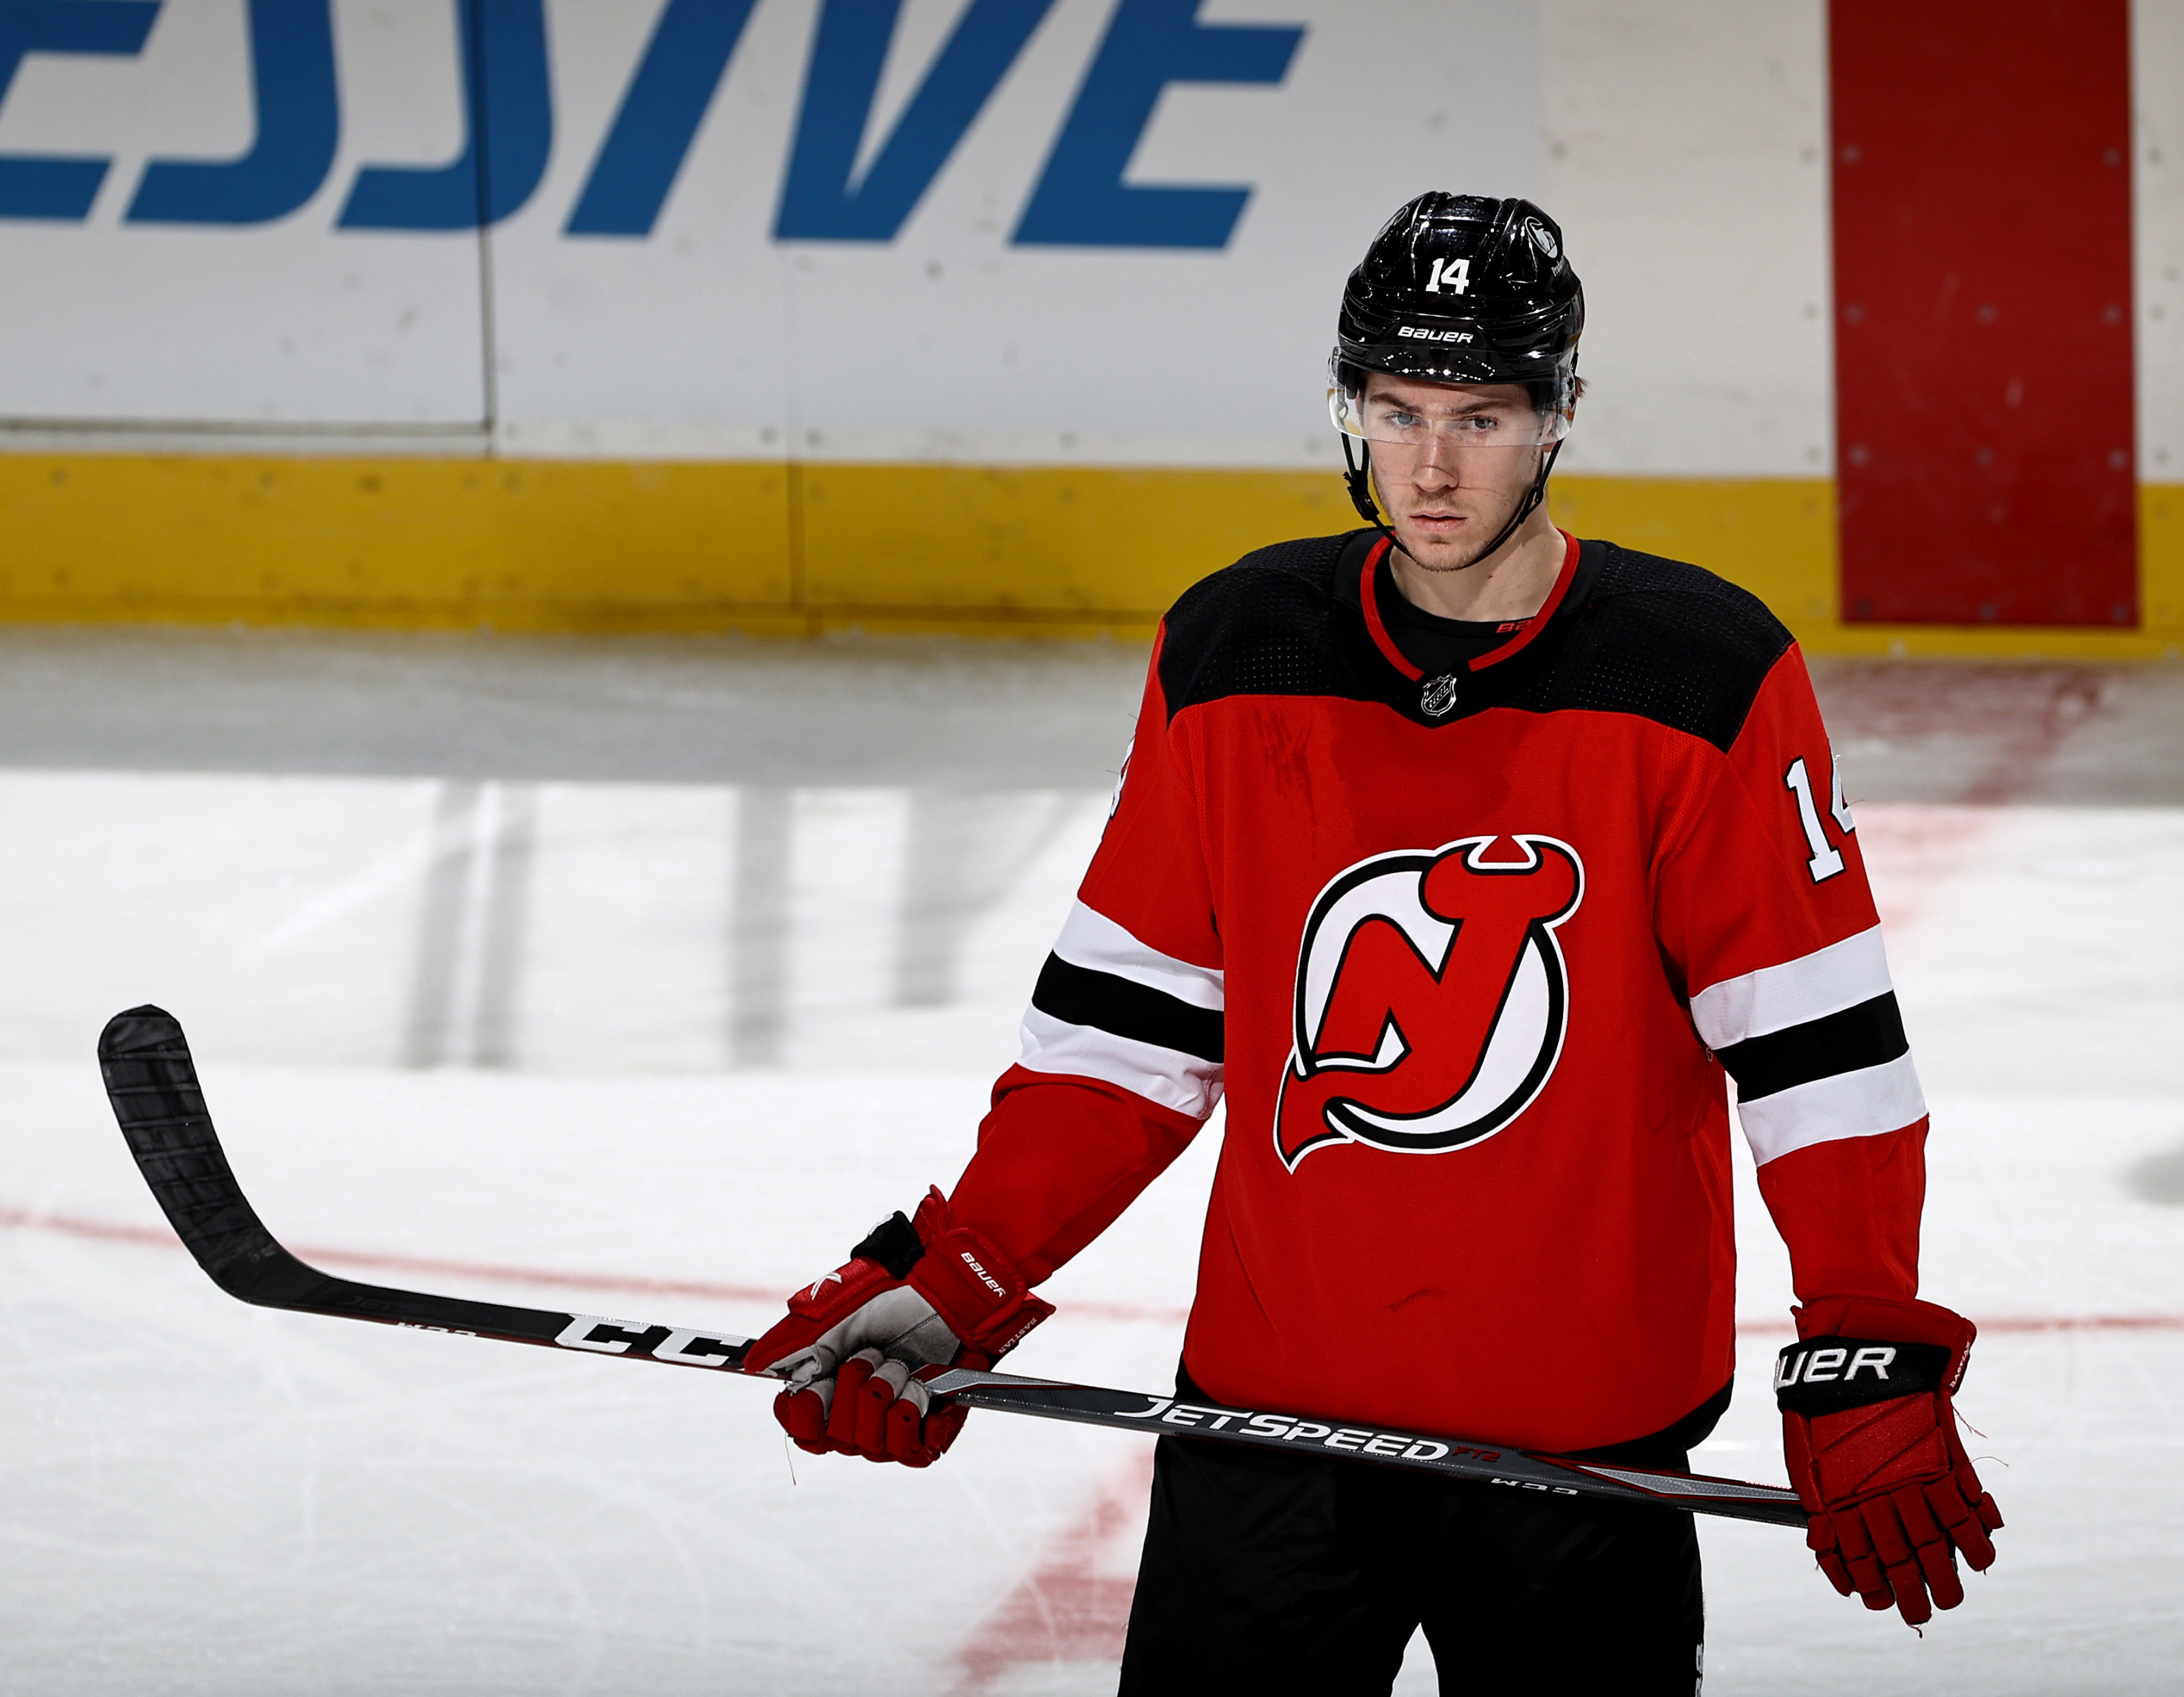 Nathan Bastian #42 (New Jersey Devils) first NHL goal Feb 25, 2019